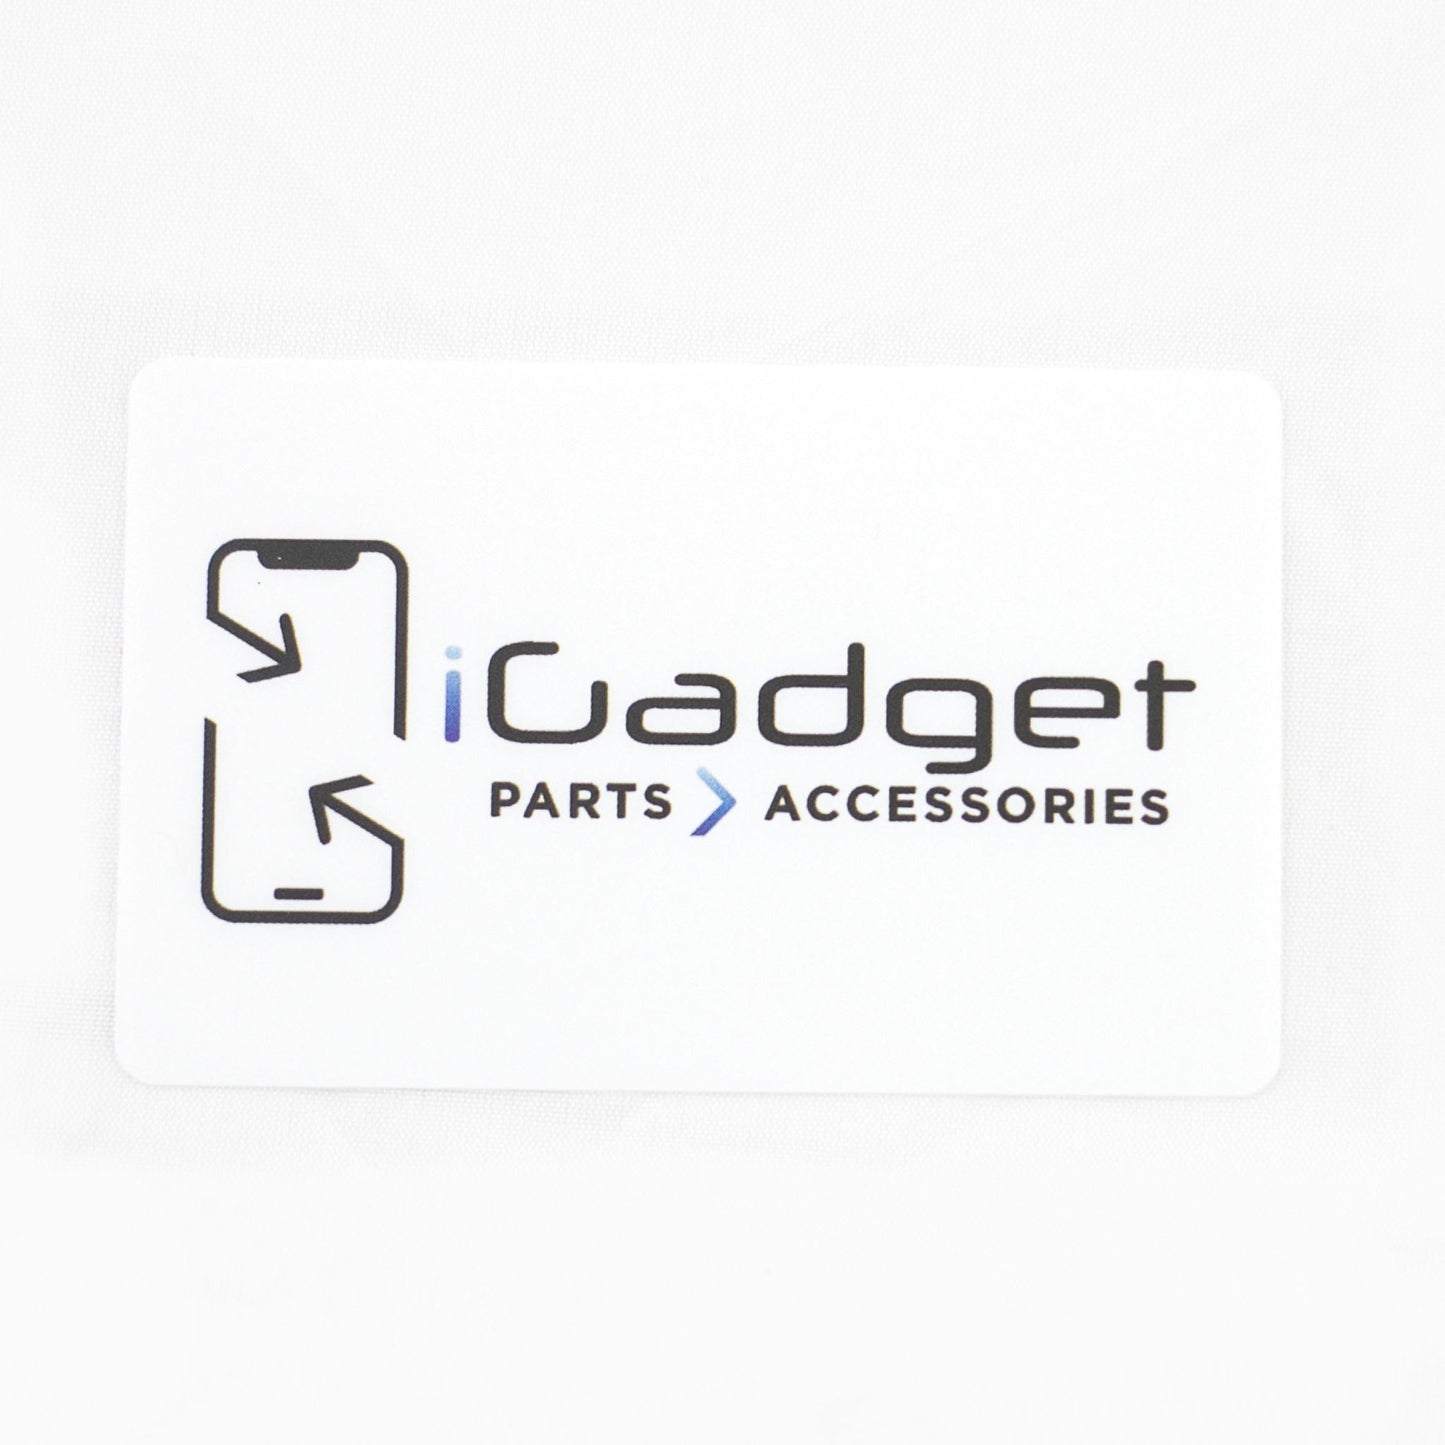 5x iGadget Plastic Flexible Opening Cards